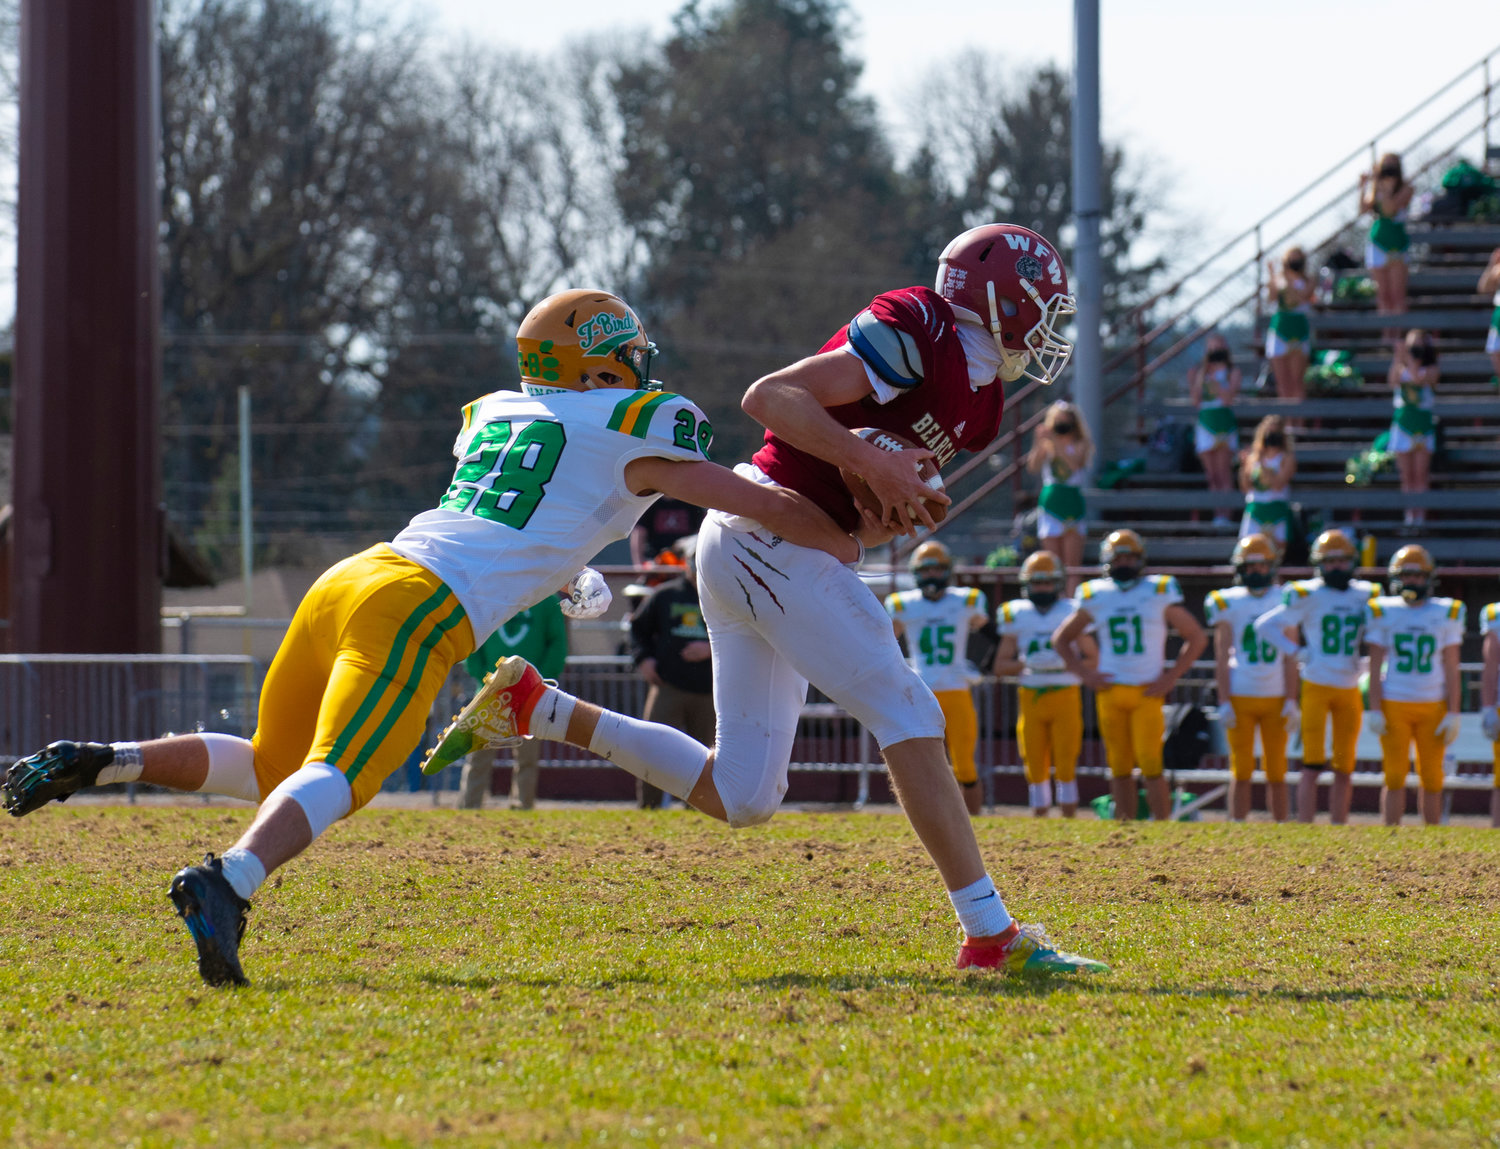 W.F. West senior wideout Carter McCoy makes a catch over the middle from Brit Lusk on Saturday.